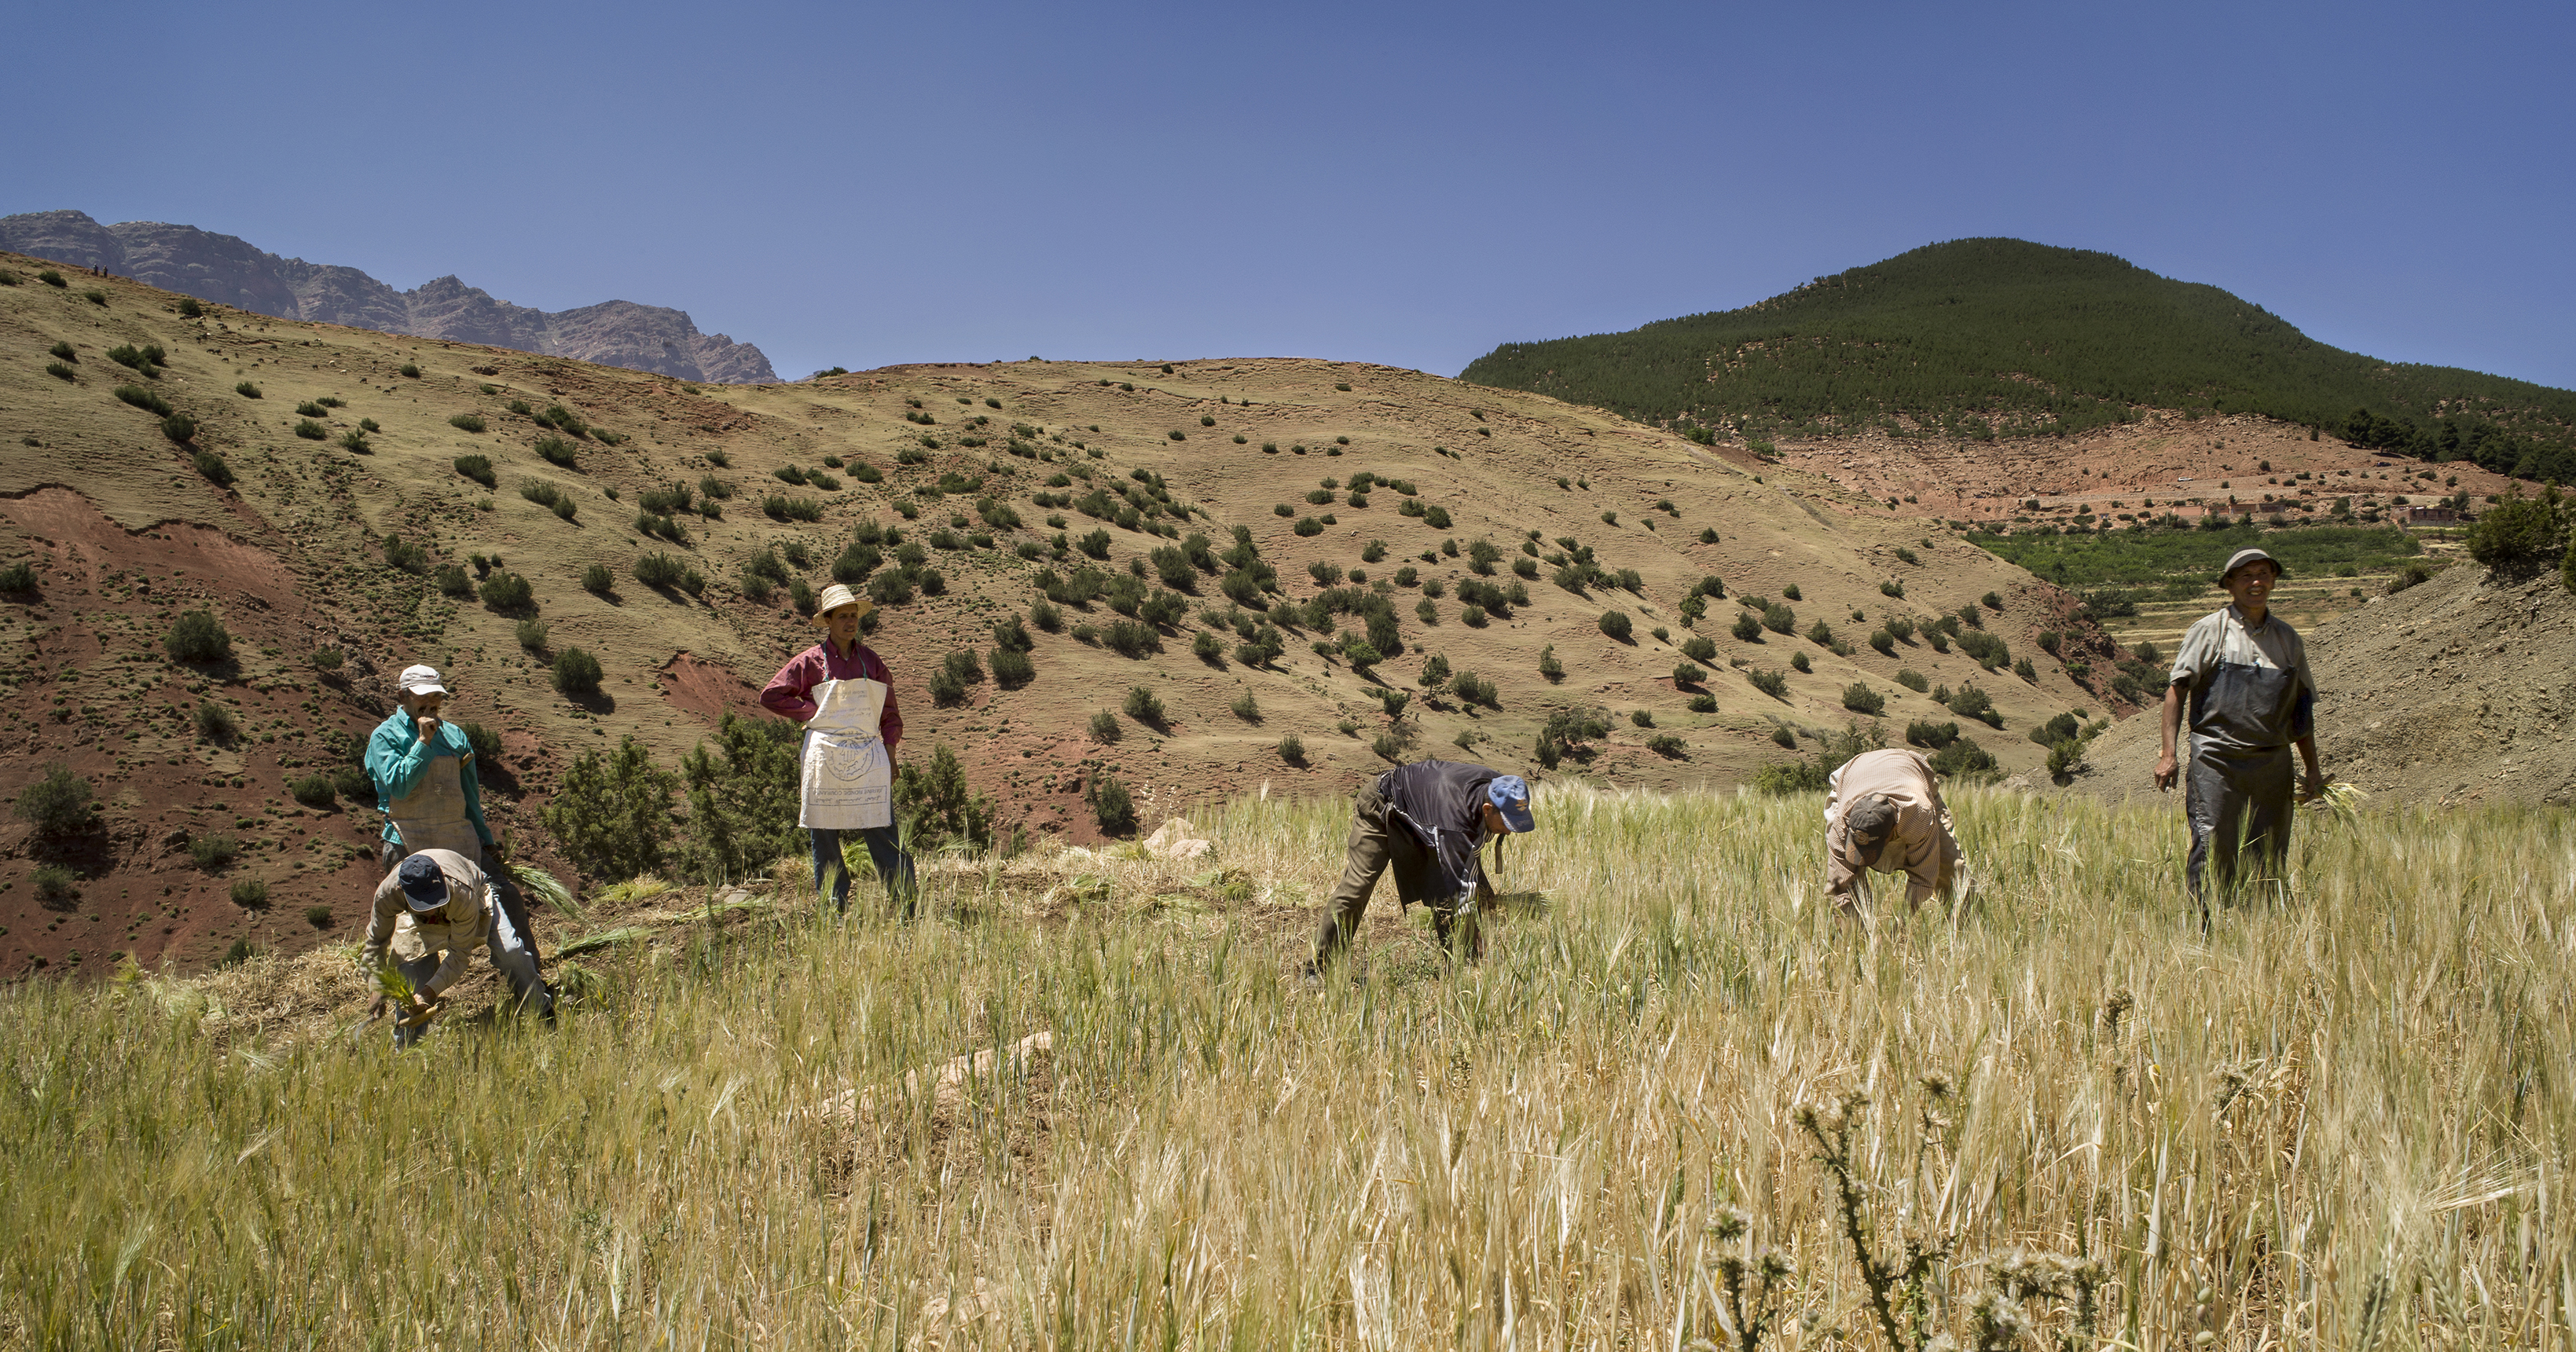 Farm workers harvesting field in Ourika valley.